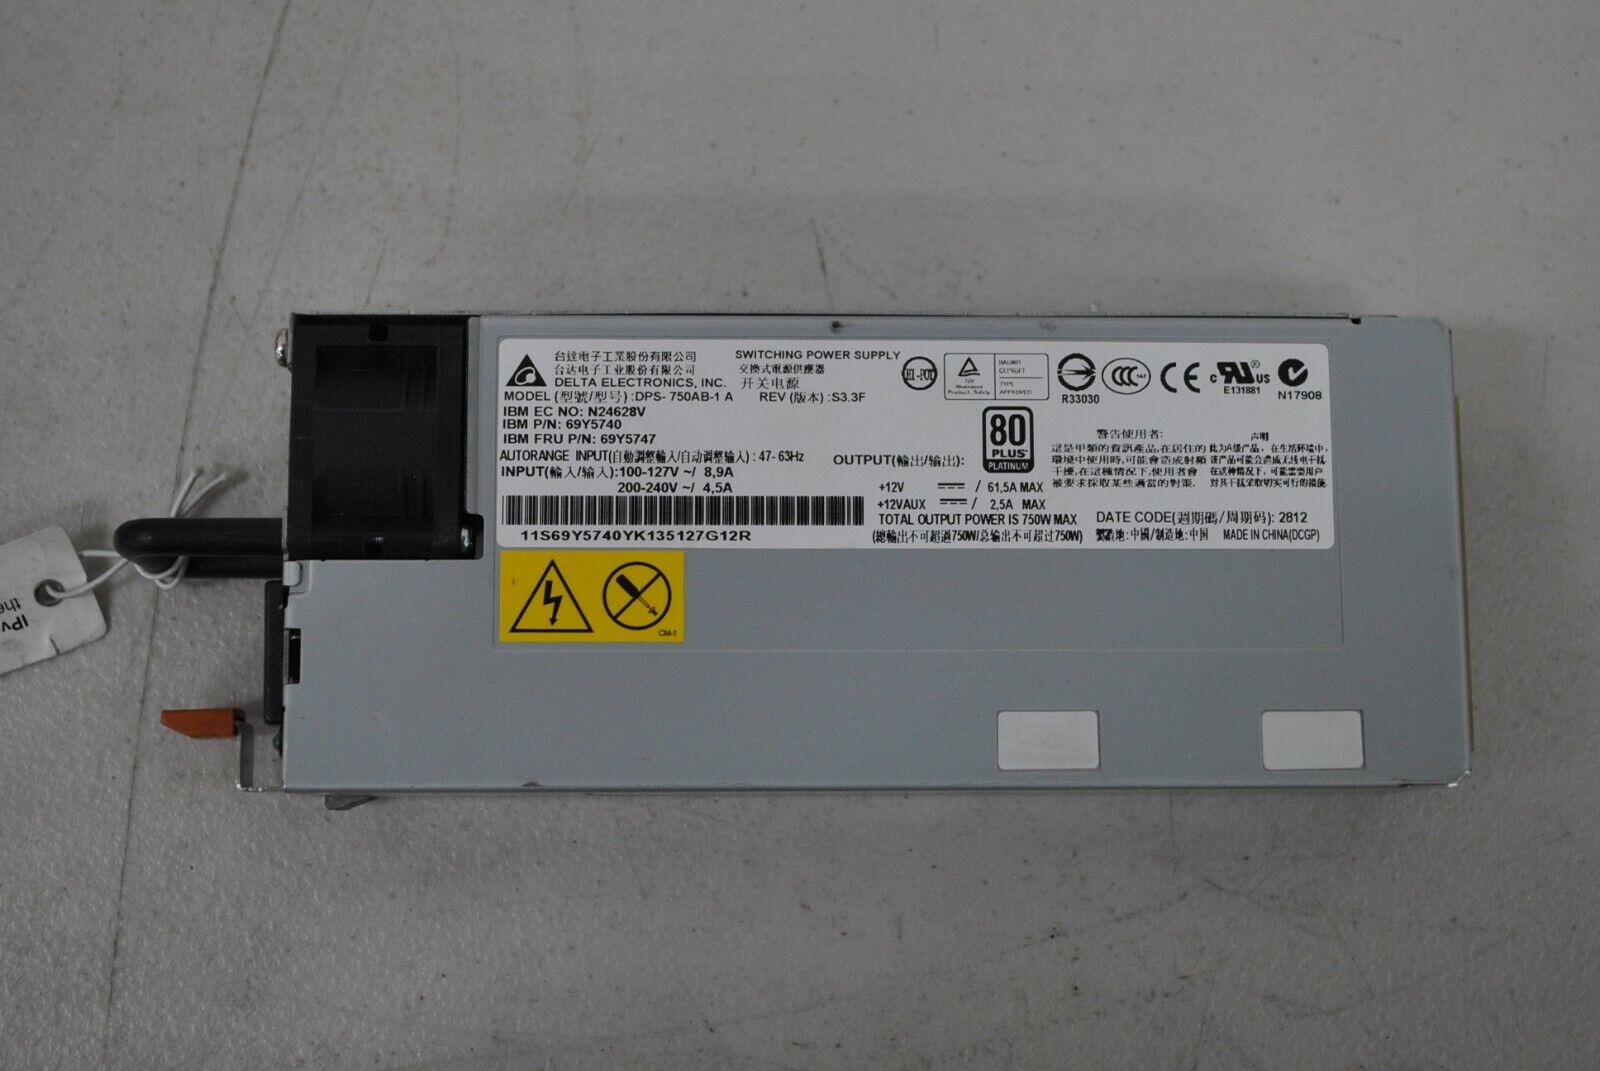 IBM 69Y5740 Delta Electronics DPS-750AB-1 A 750W Switching Power Supply 